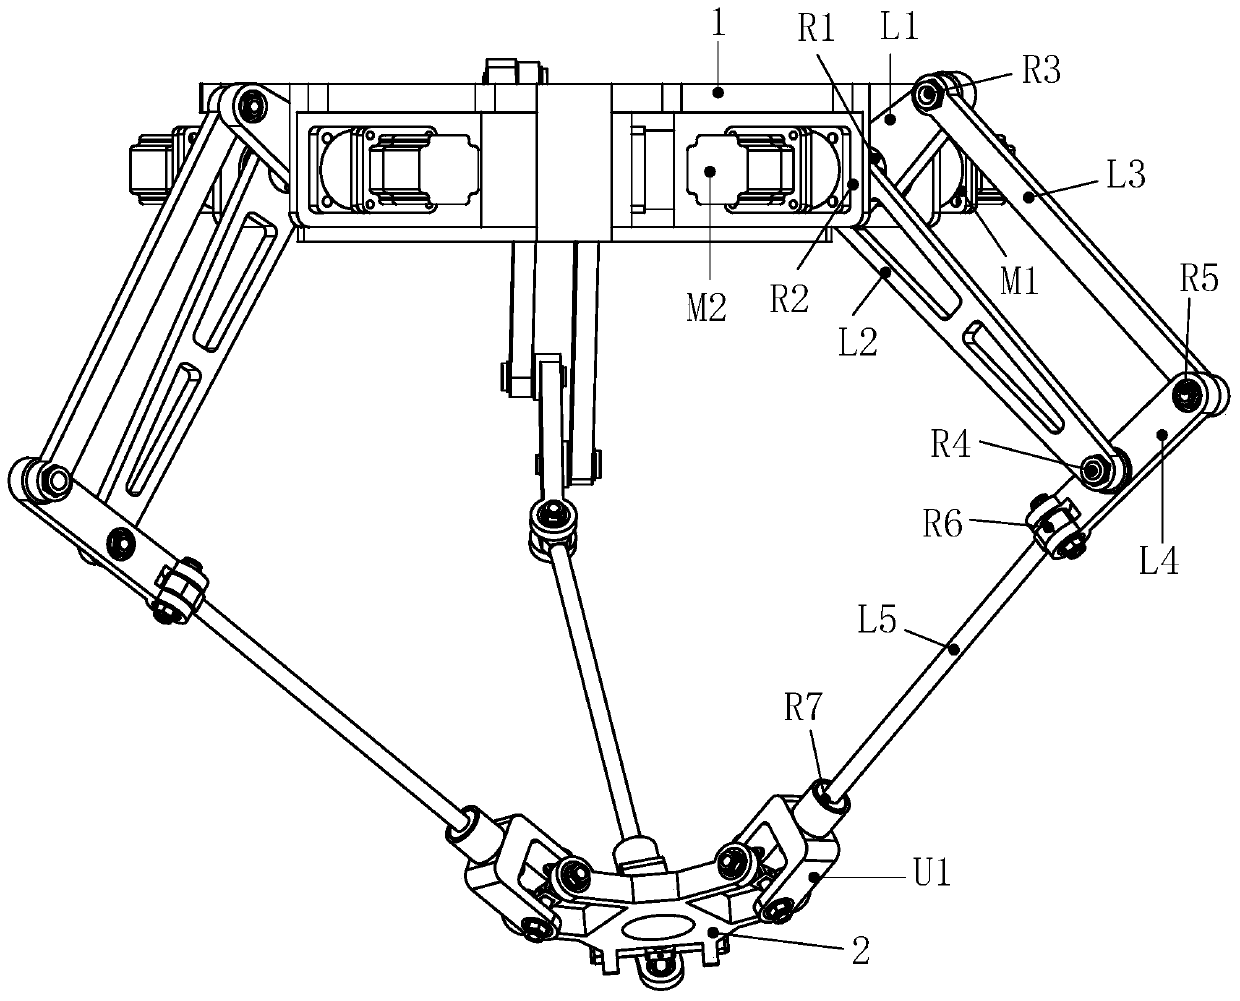 Parallel robot with large working space and low inertia